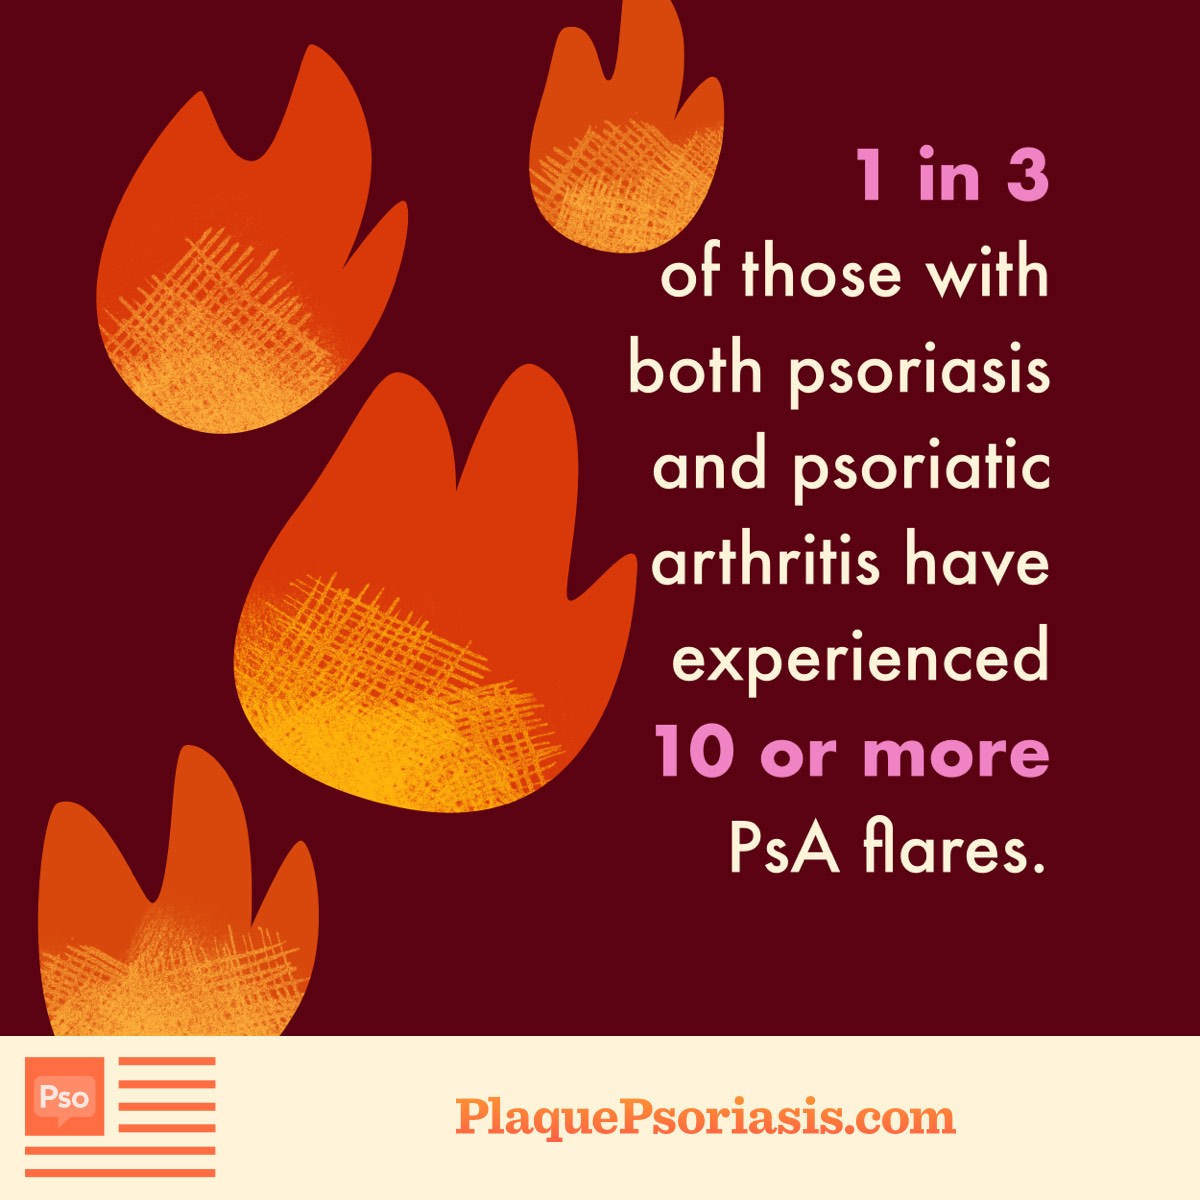 1 in 3 of those with both psoriasis and psoriatic arthritis have experienced 10 or more PsA flares.